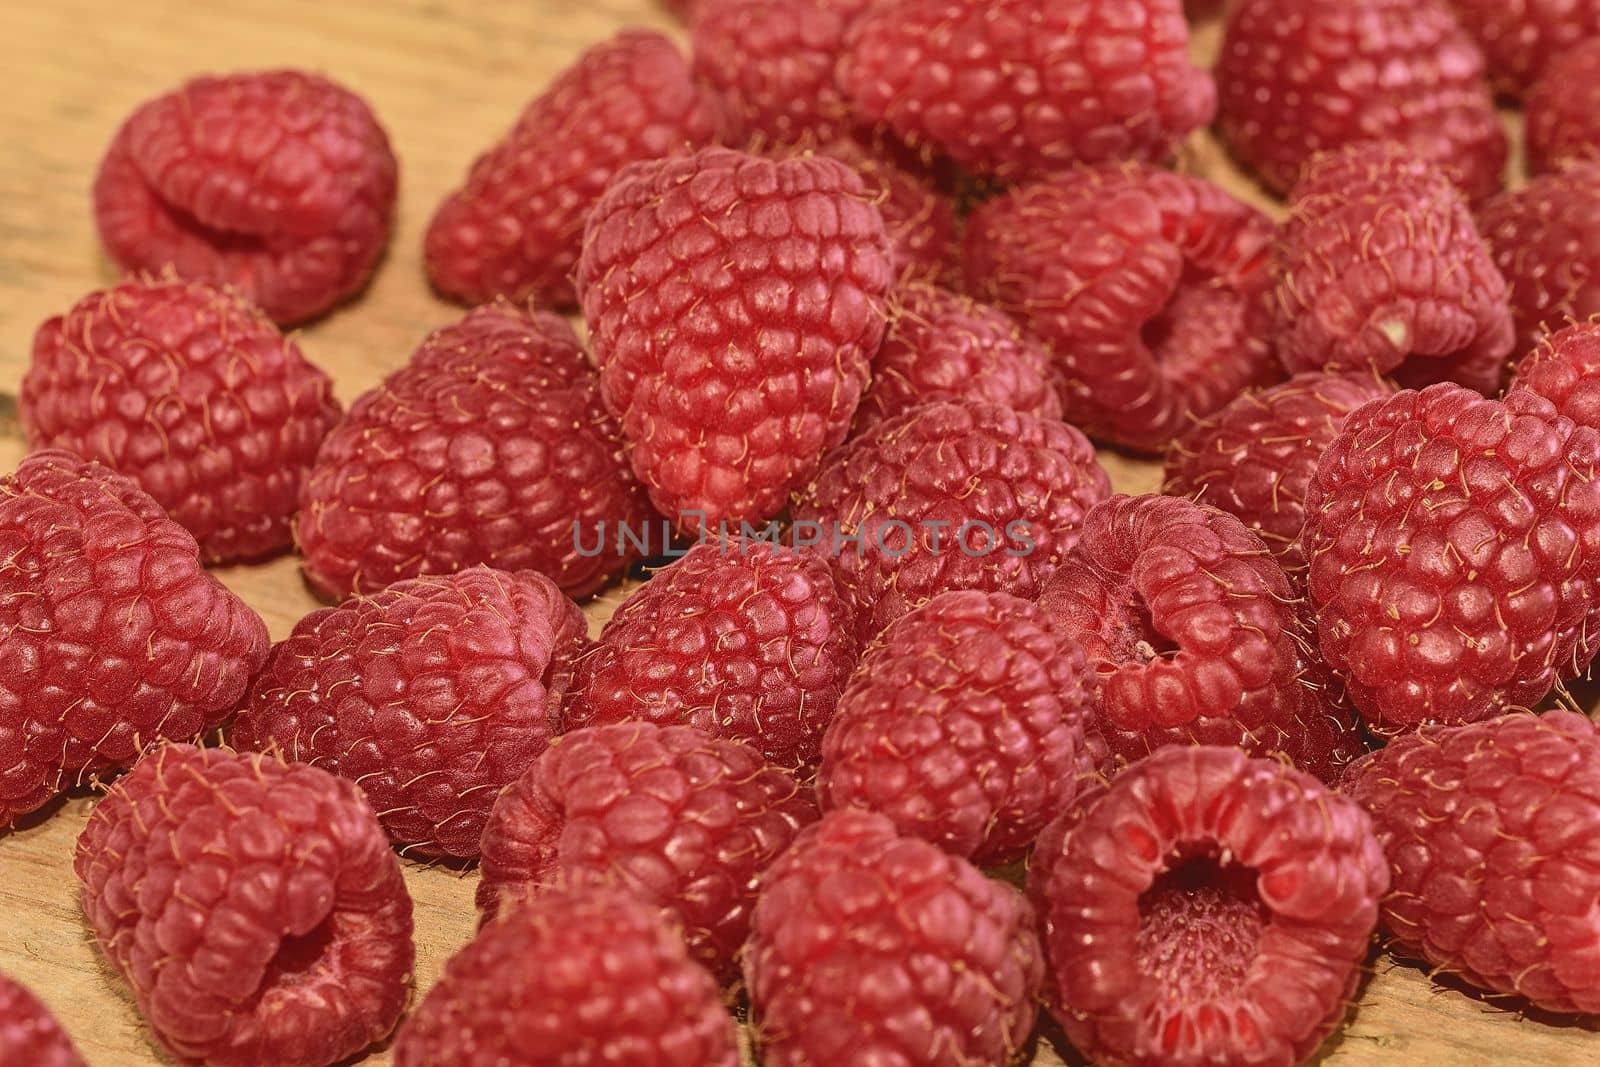 Red-fruited raspberries on wooden background. Raspberries background. Close-up.